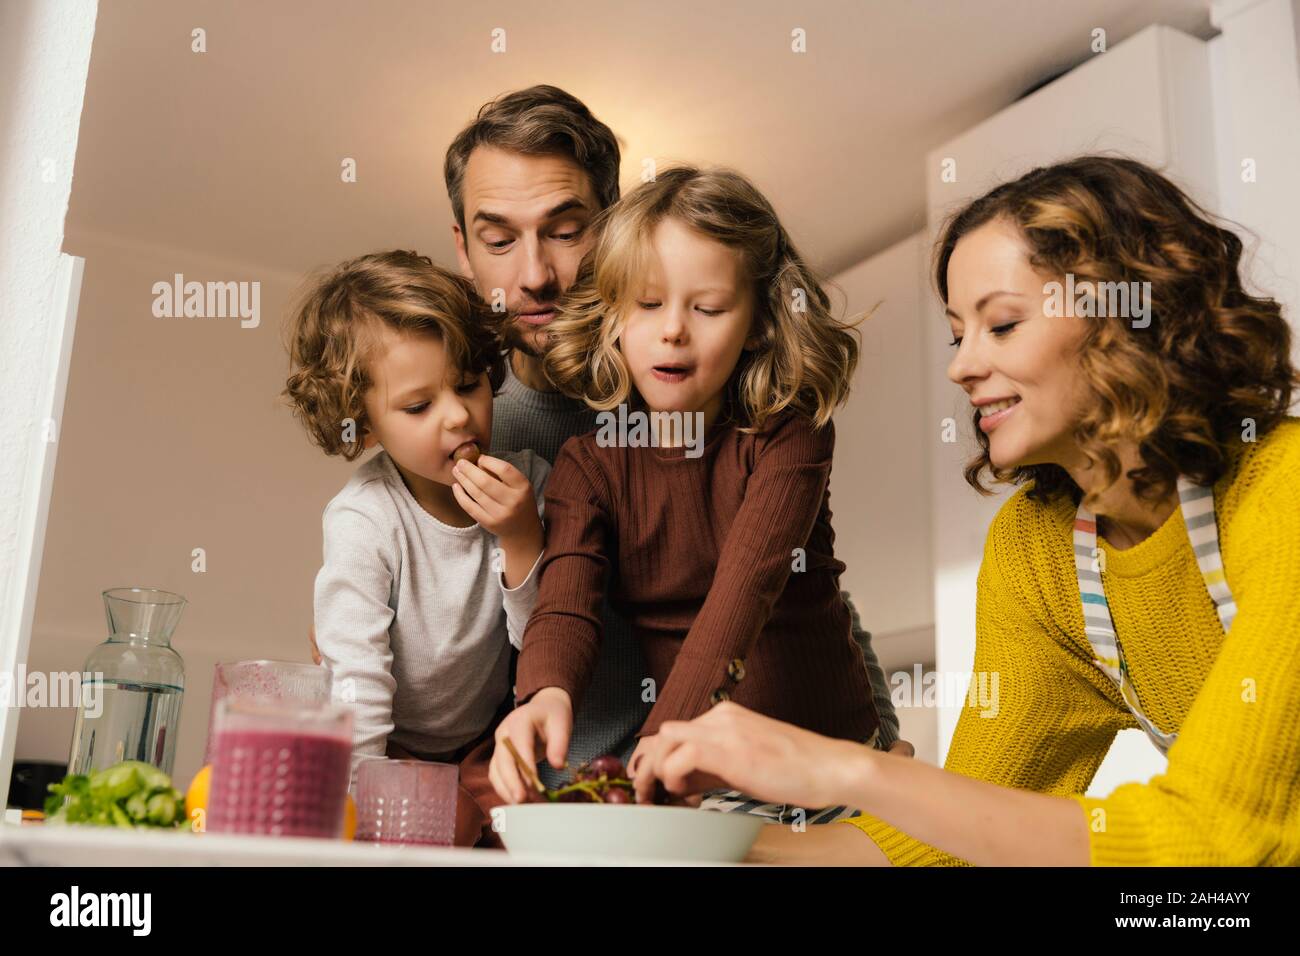 Family eating grapes in kitchen Banque D'Images